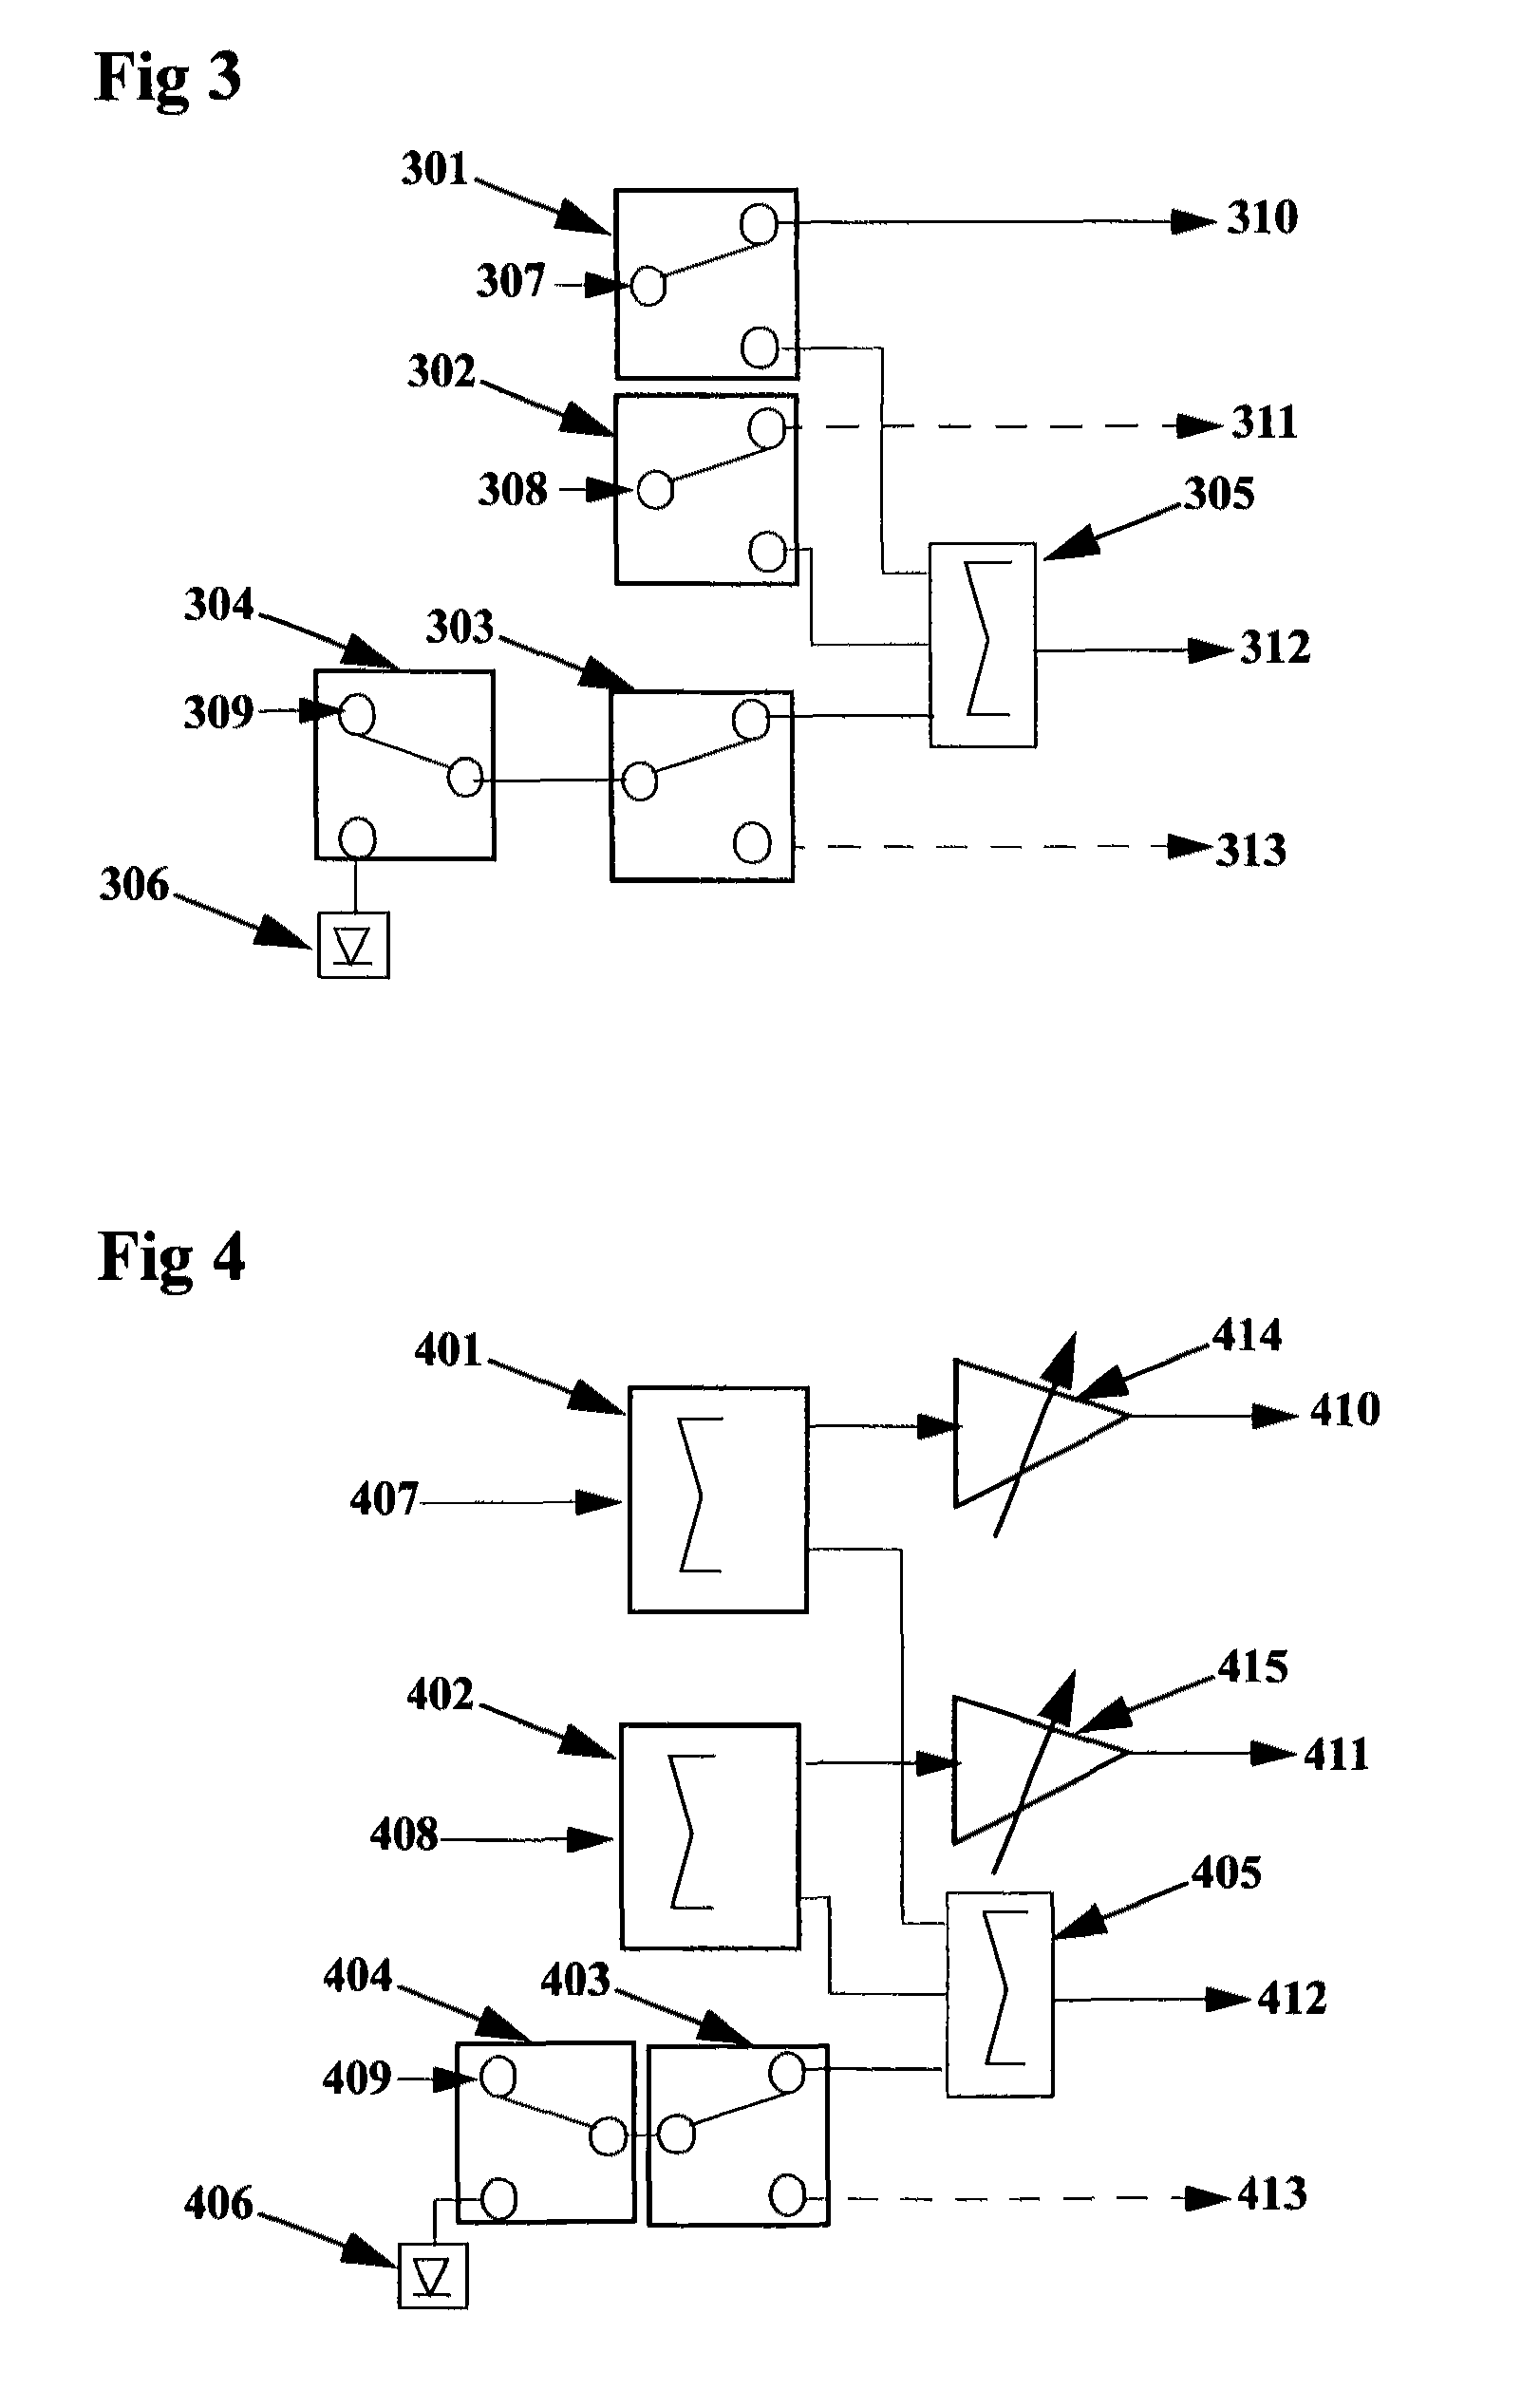 Apparatus for high density low cost automatic test applications